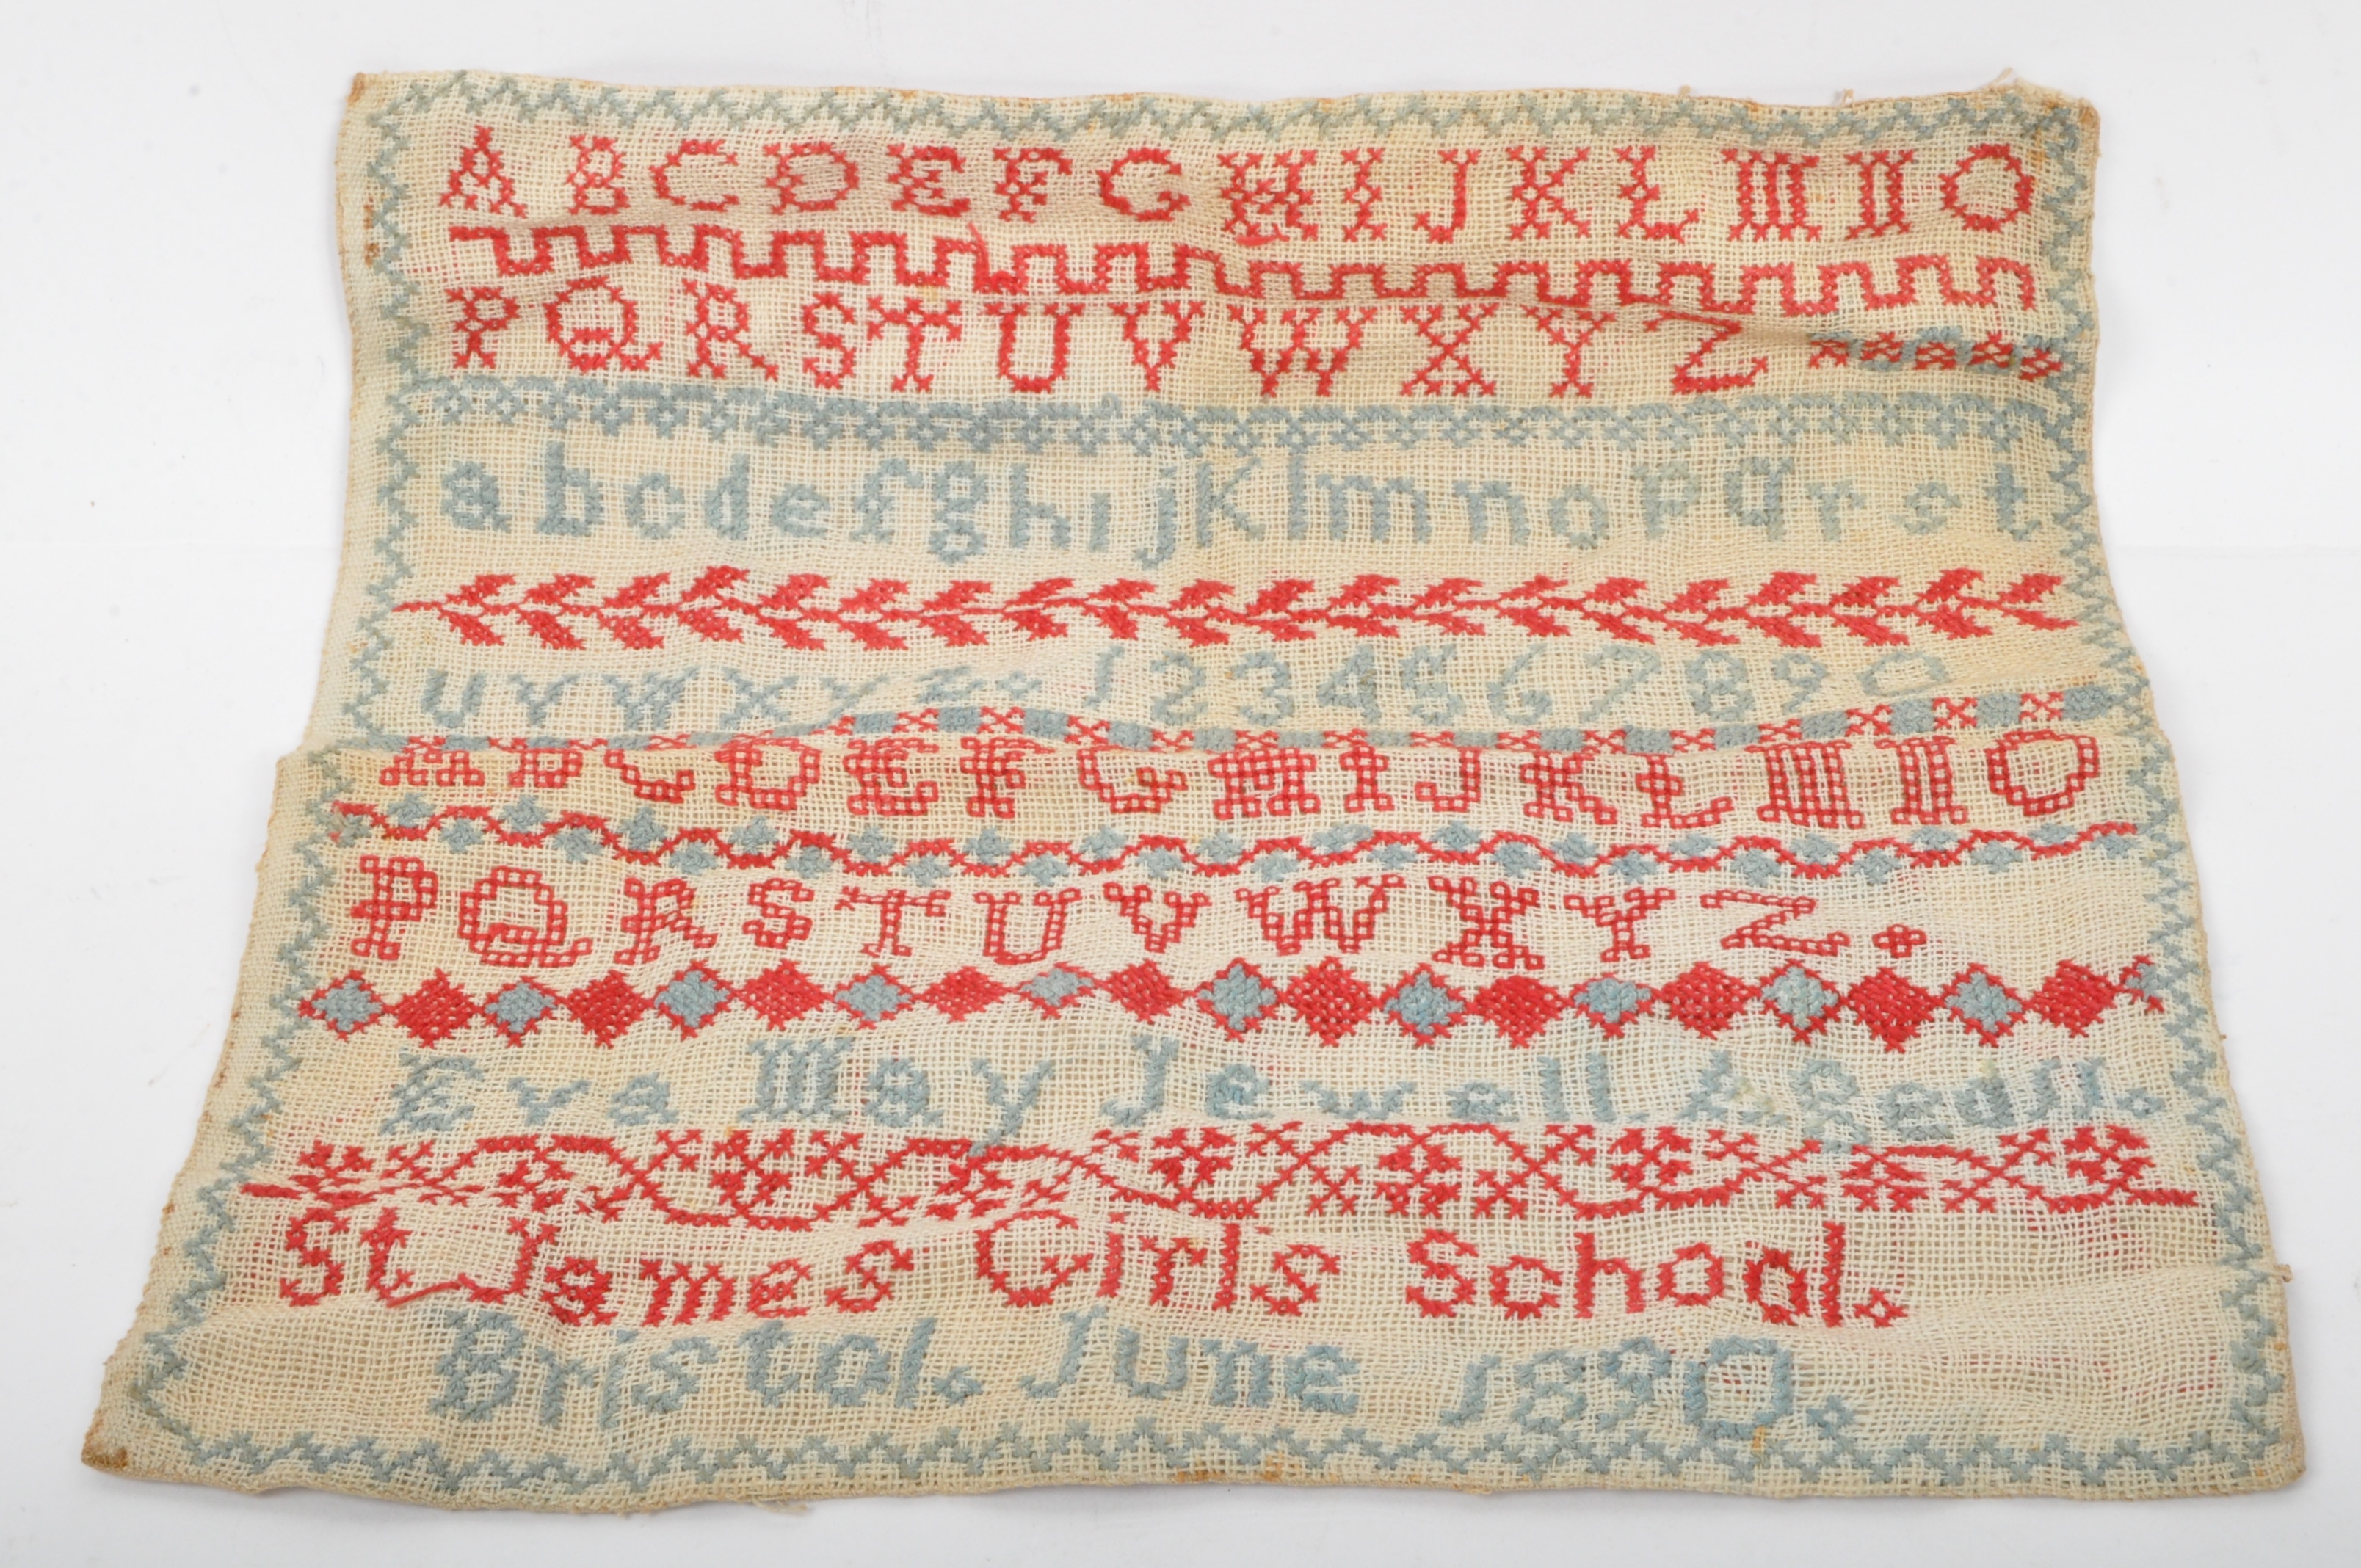 VICTORIAN LATE 19TH CENTURY NEEDLE POINT SAMPLER - Image 2 of 4